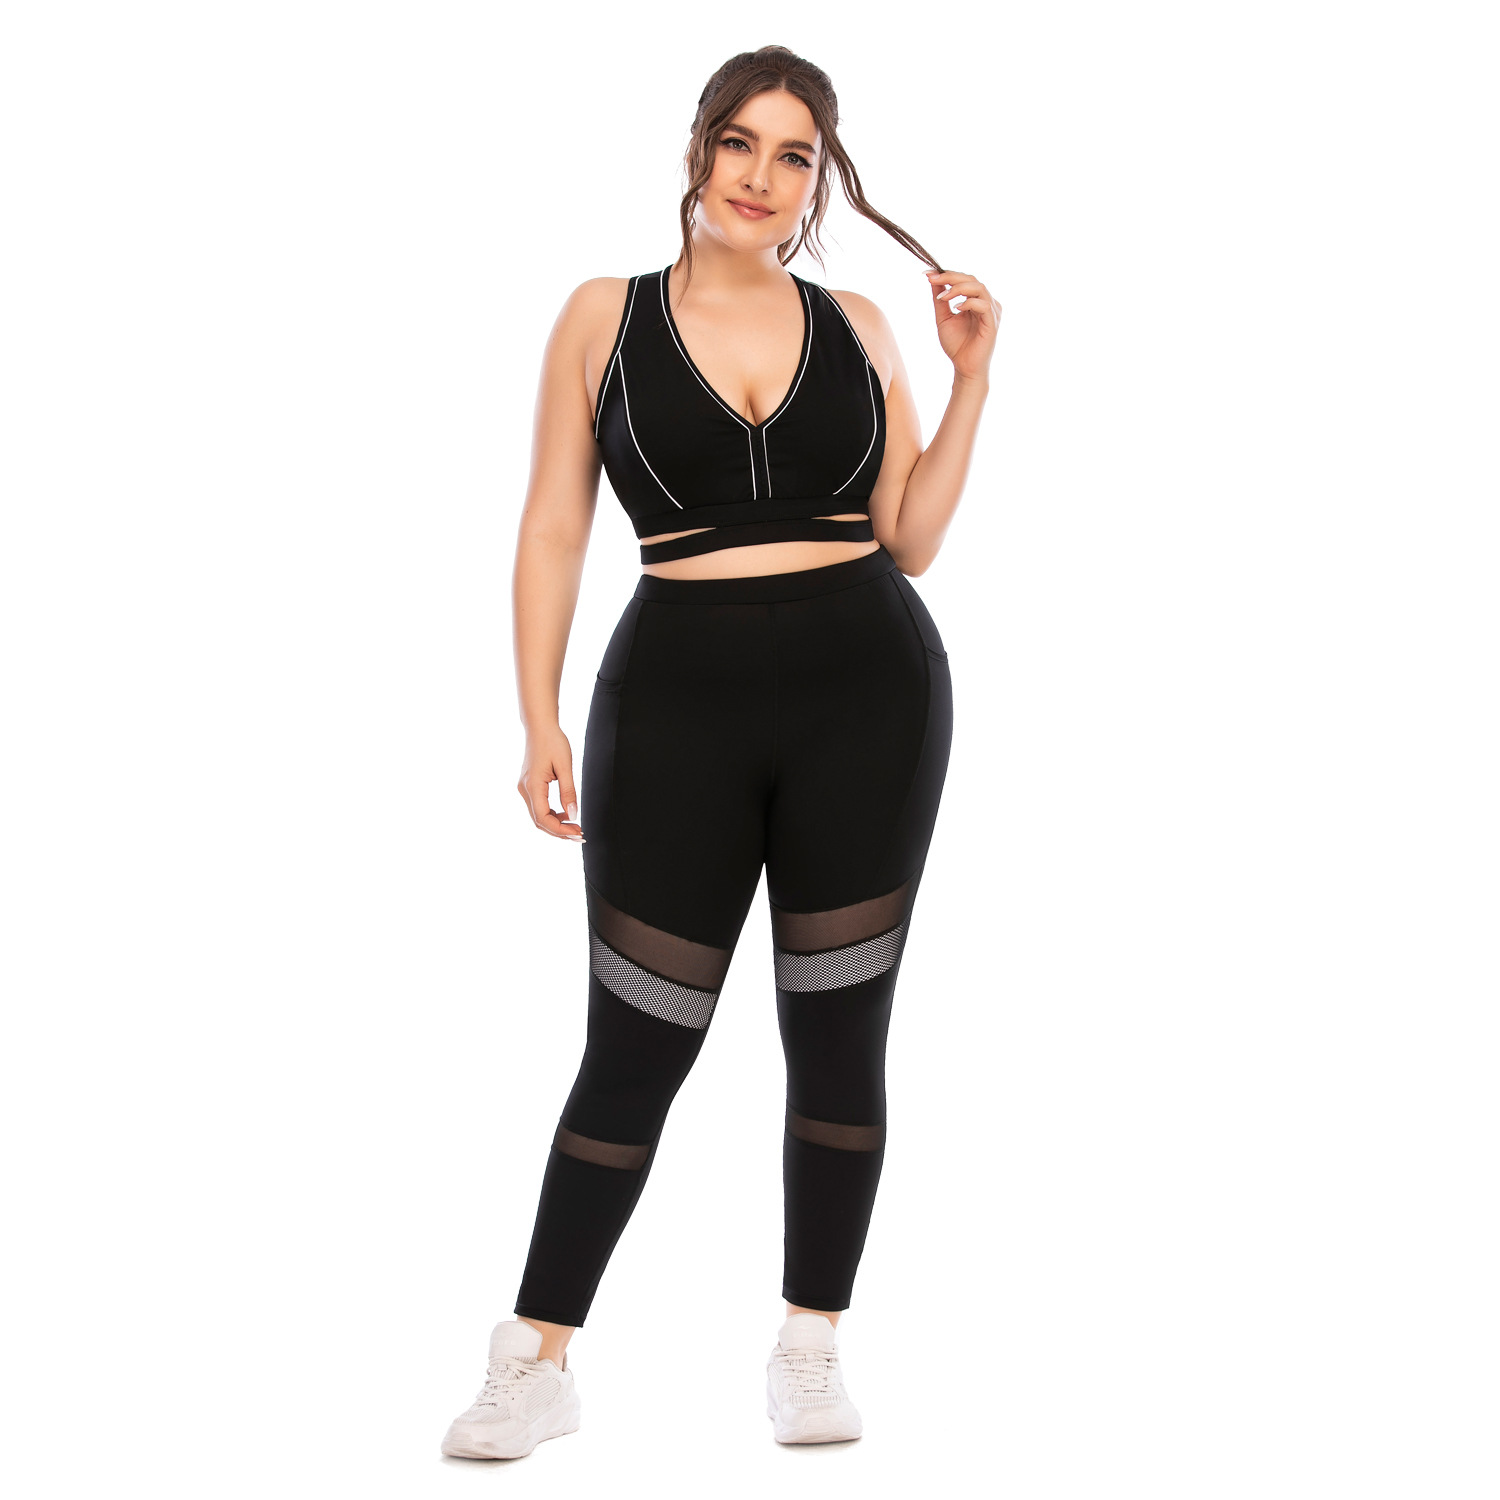 Sports Wear for Obese Women Gym Legging Yoga Set Aerial Body Training Fitness Suit Female Plus Size Sportsuit Workout Clothes